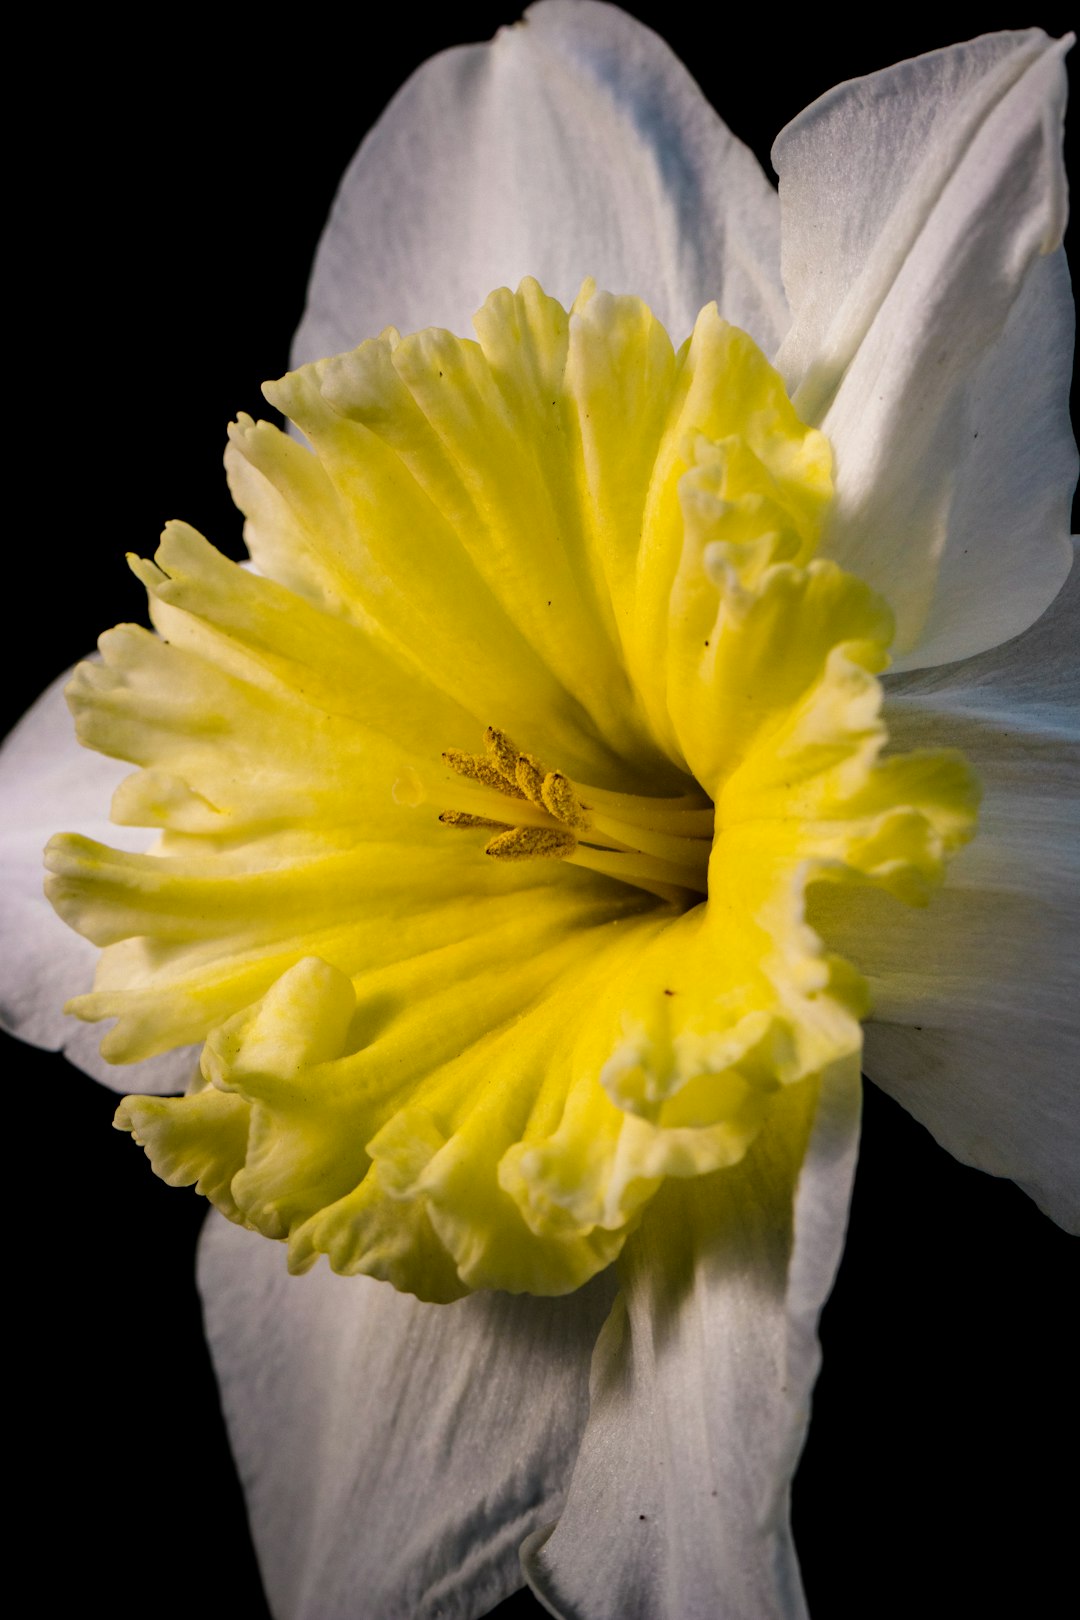 yellow and white flower in close up photography